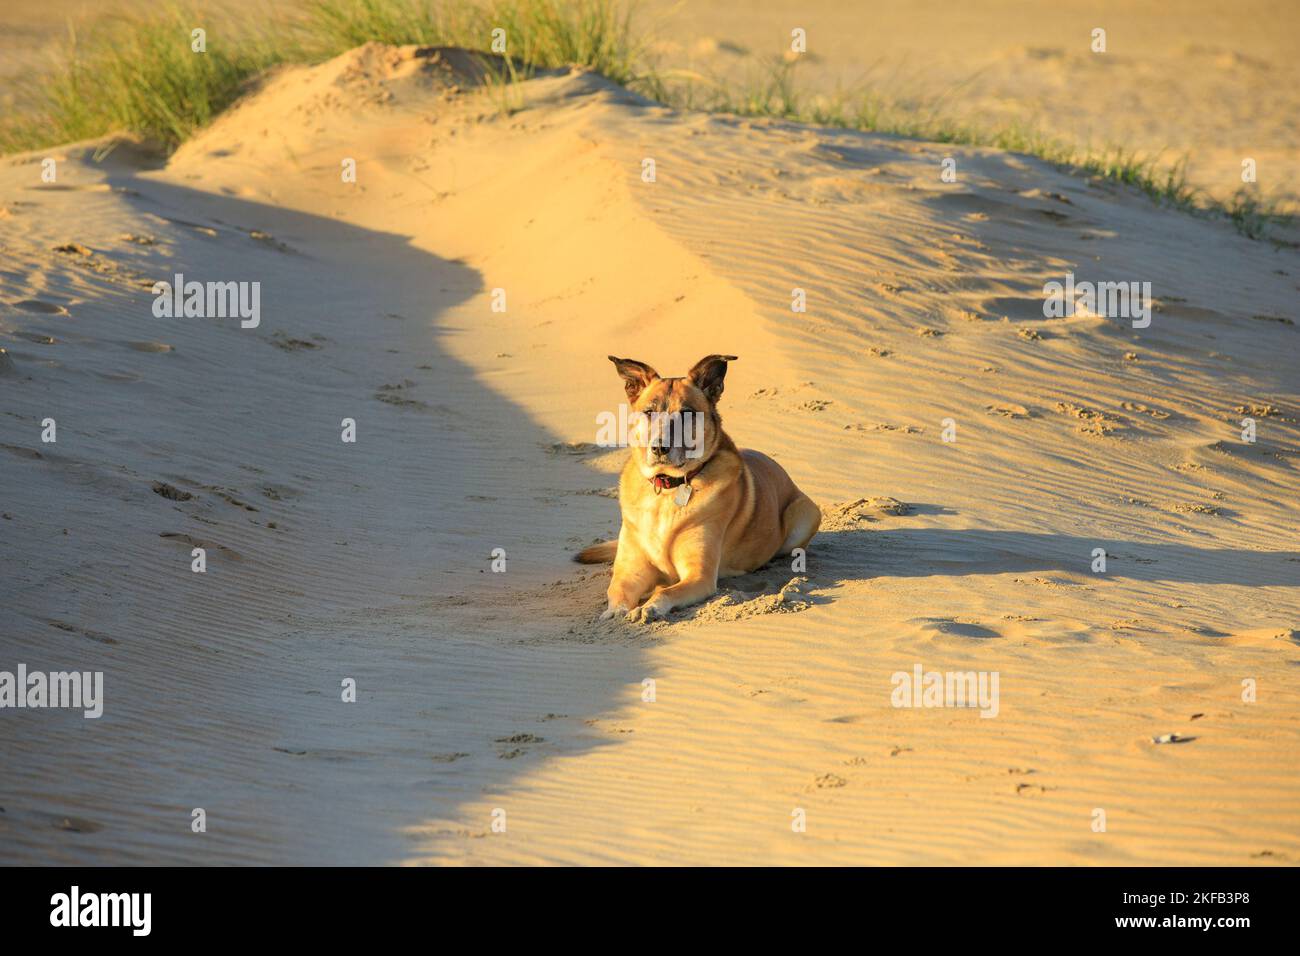 Close up of a brown yellow adorable lop-eared sheepdog with name tag collar in the golden light of the rising sun in a sand-blown sandy dune landscape Stock Photo